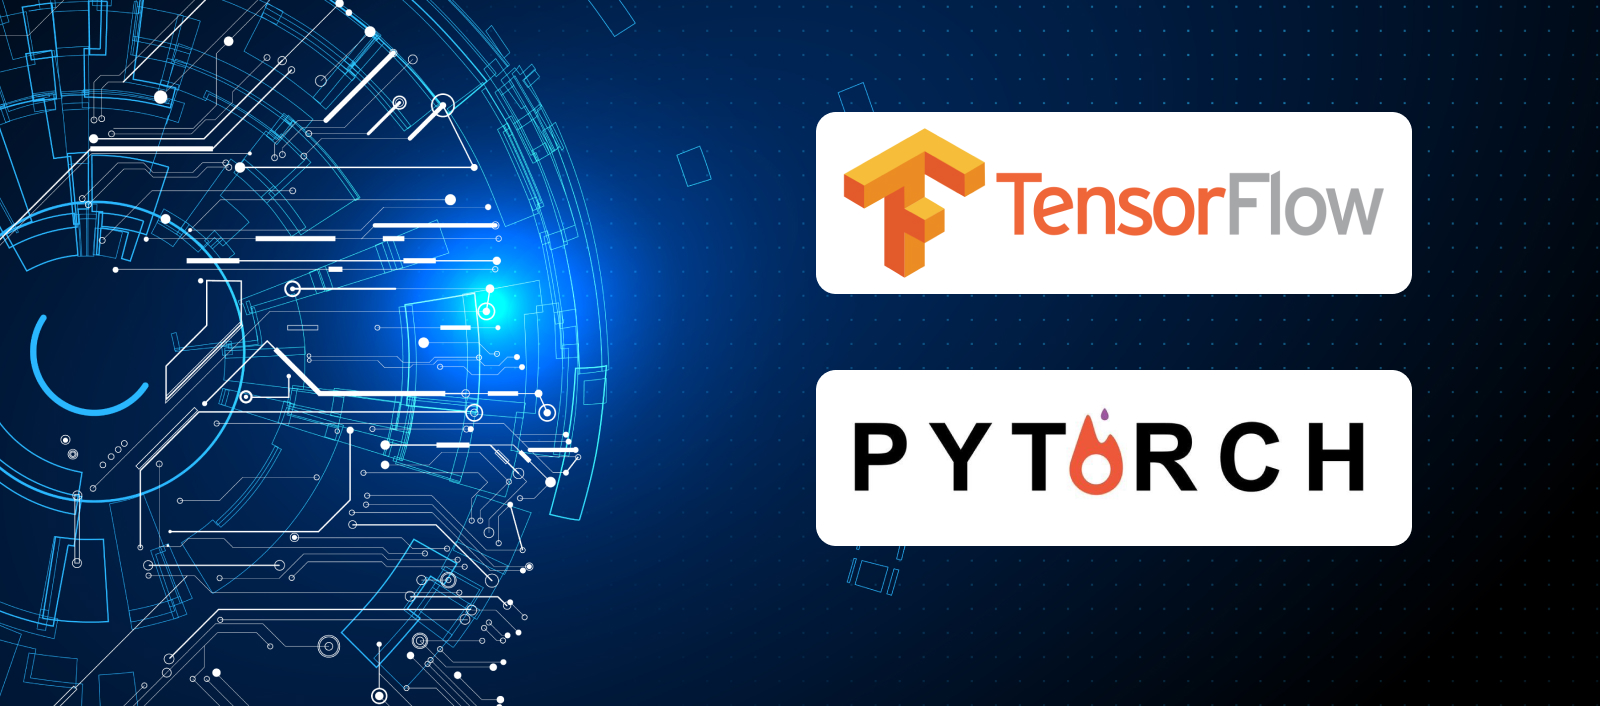 TensorFlow & PyTorch for Deep Learning